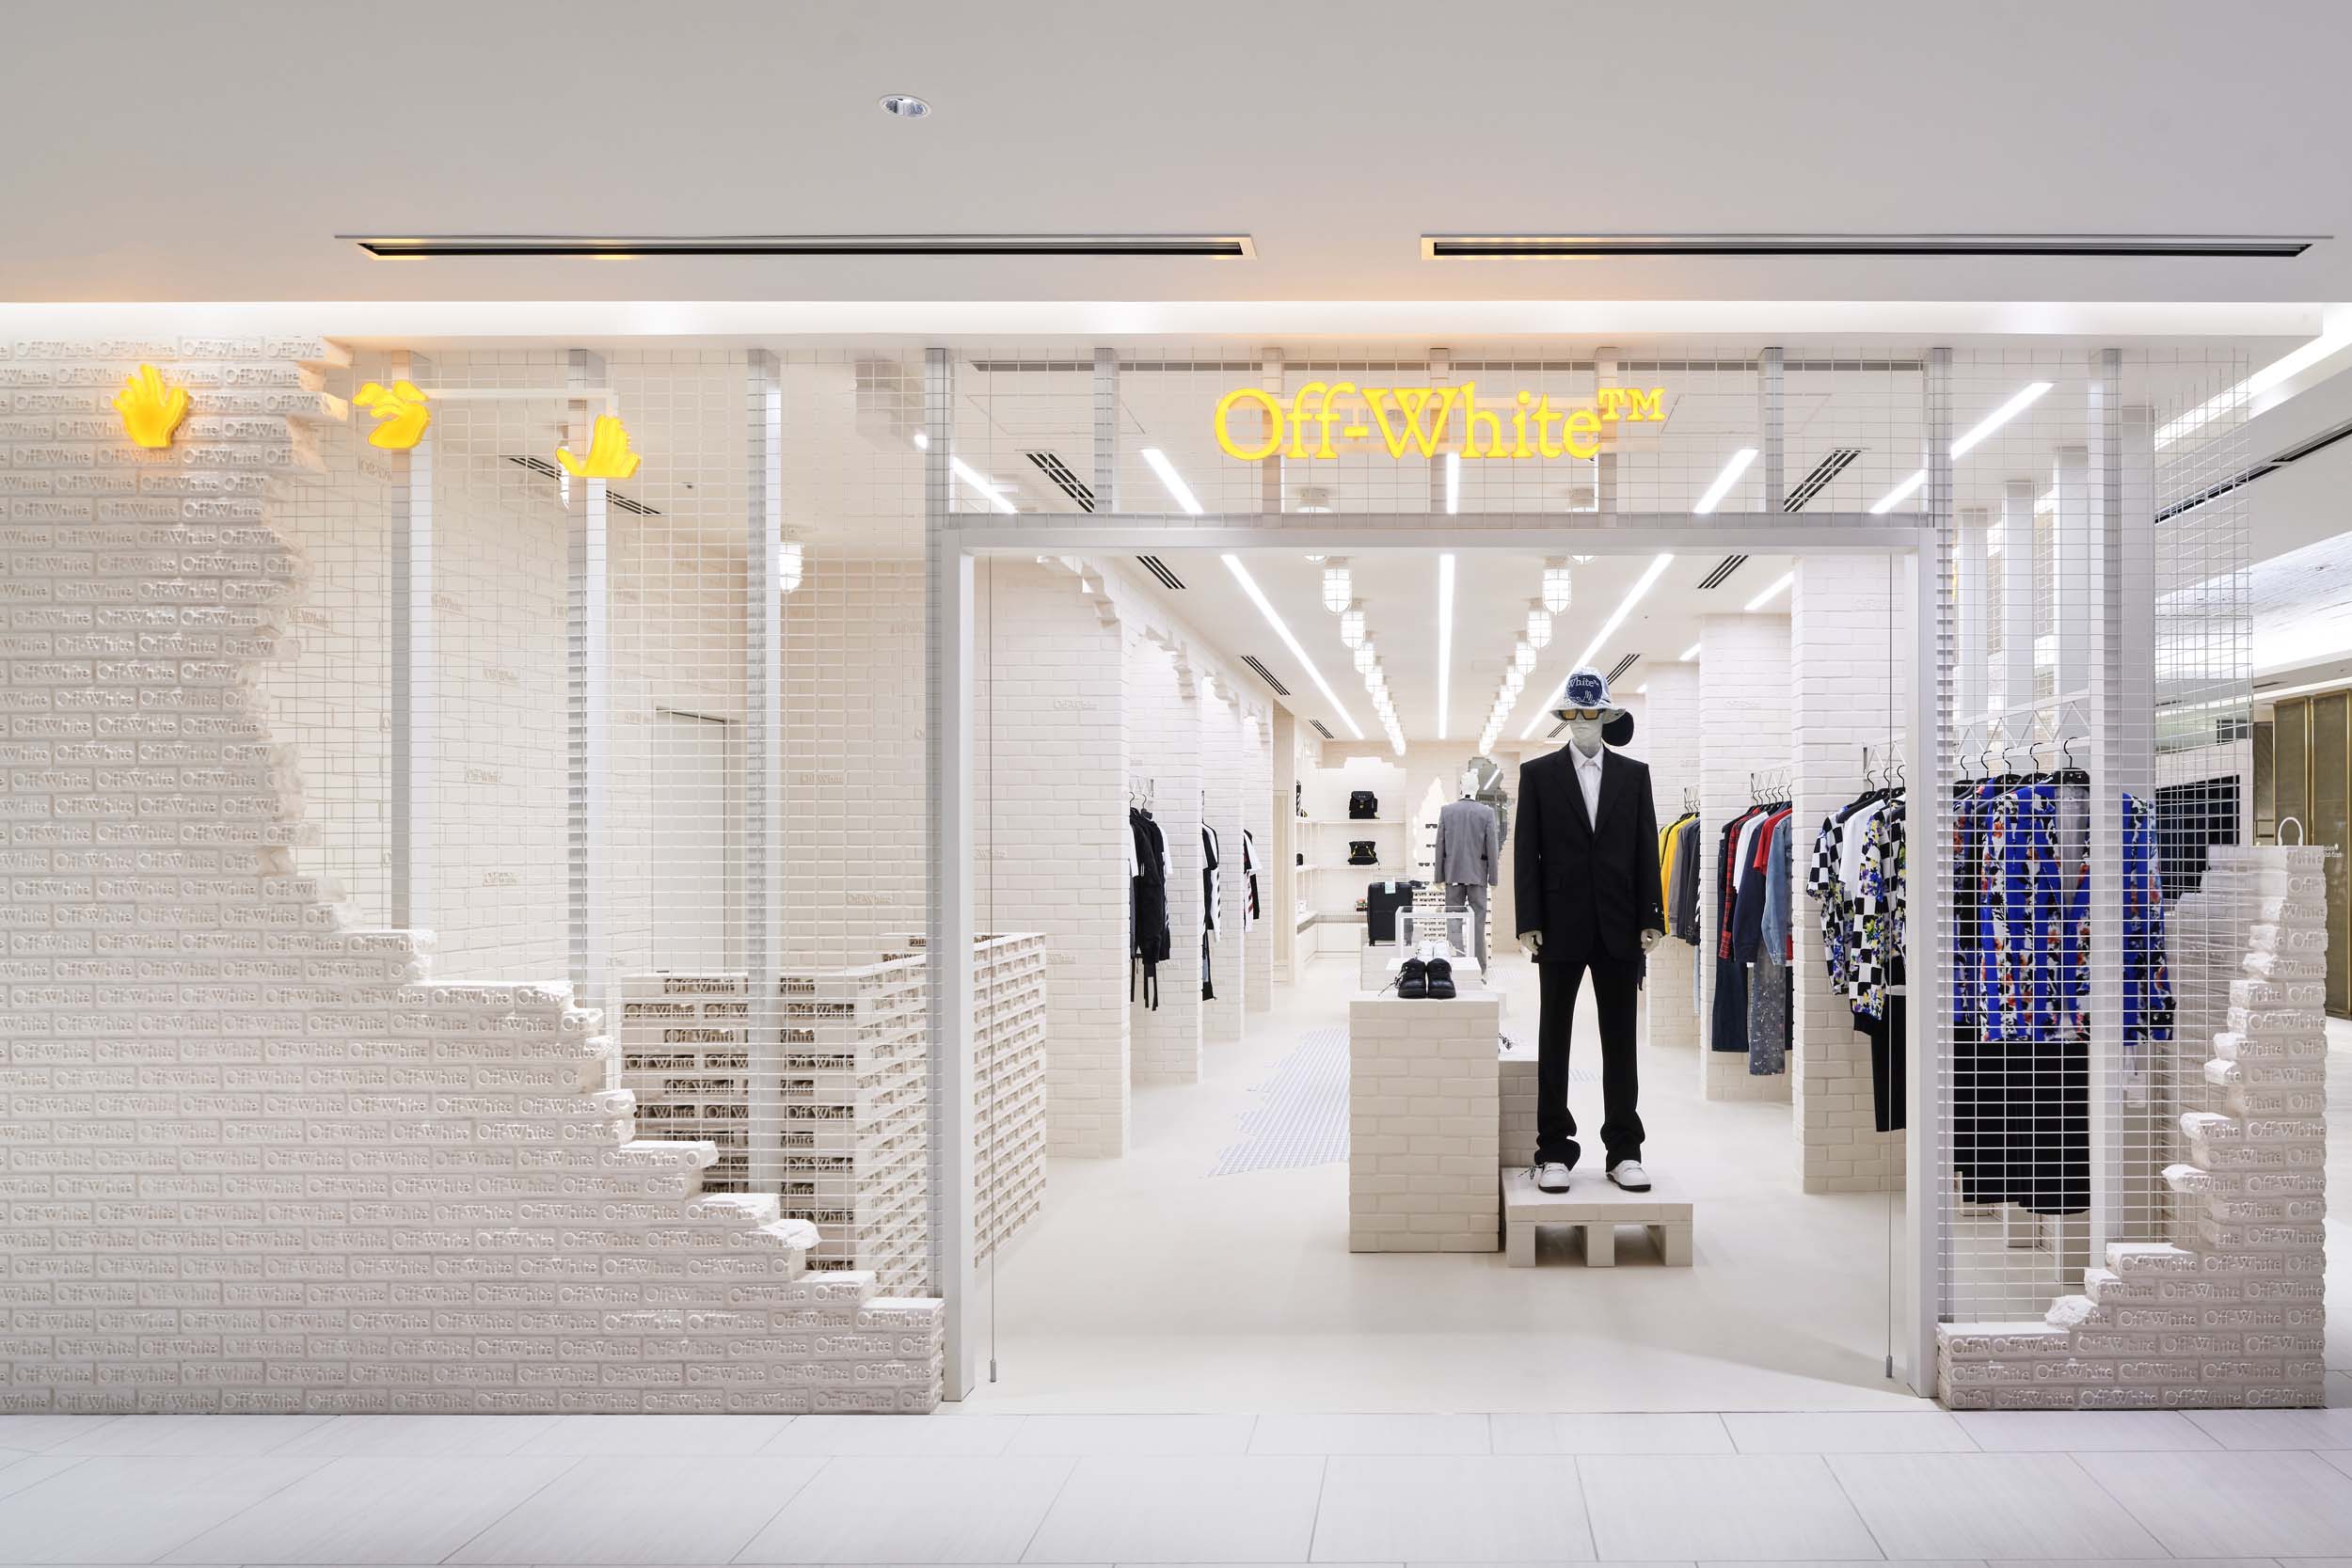 James Wines crafts an appropriately “off-white” interior for Virgil Abloh's  Off-White